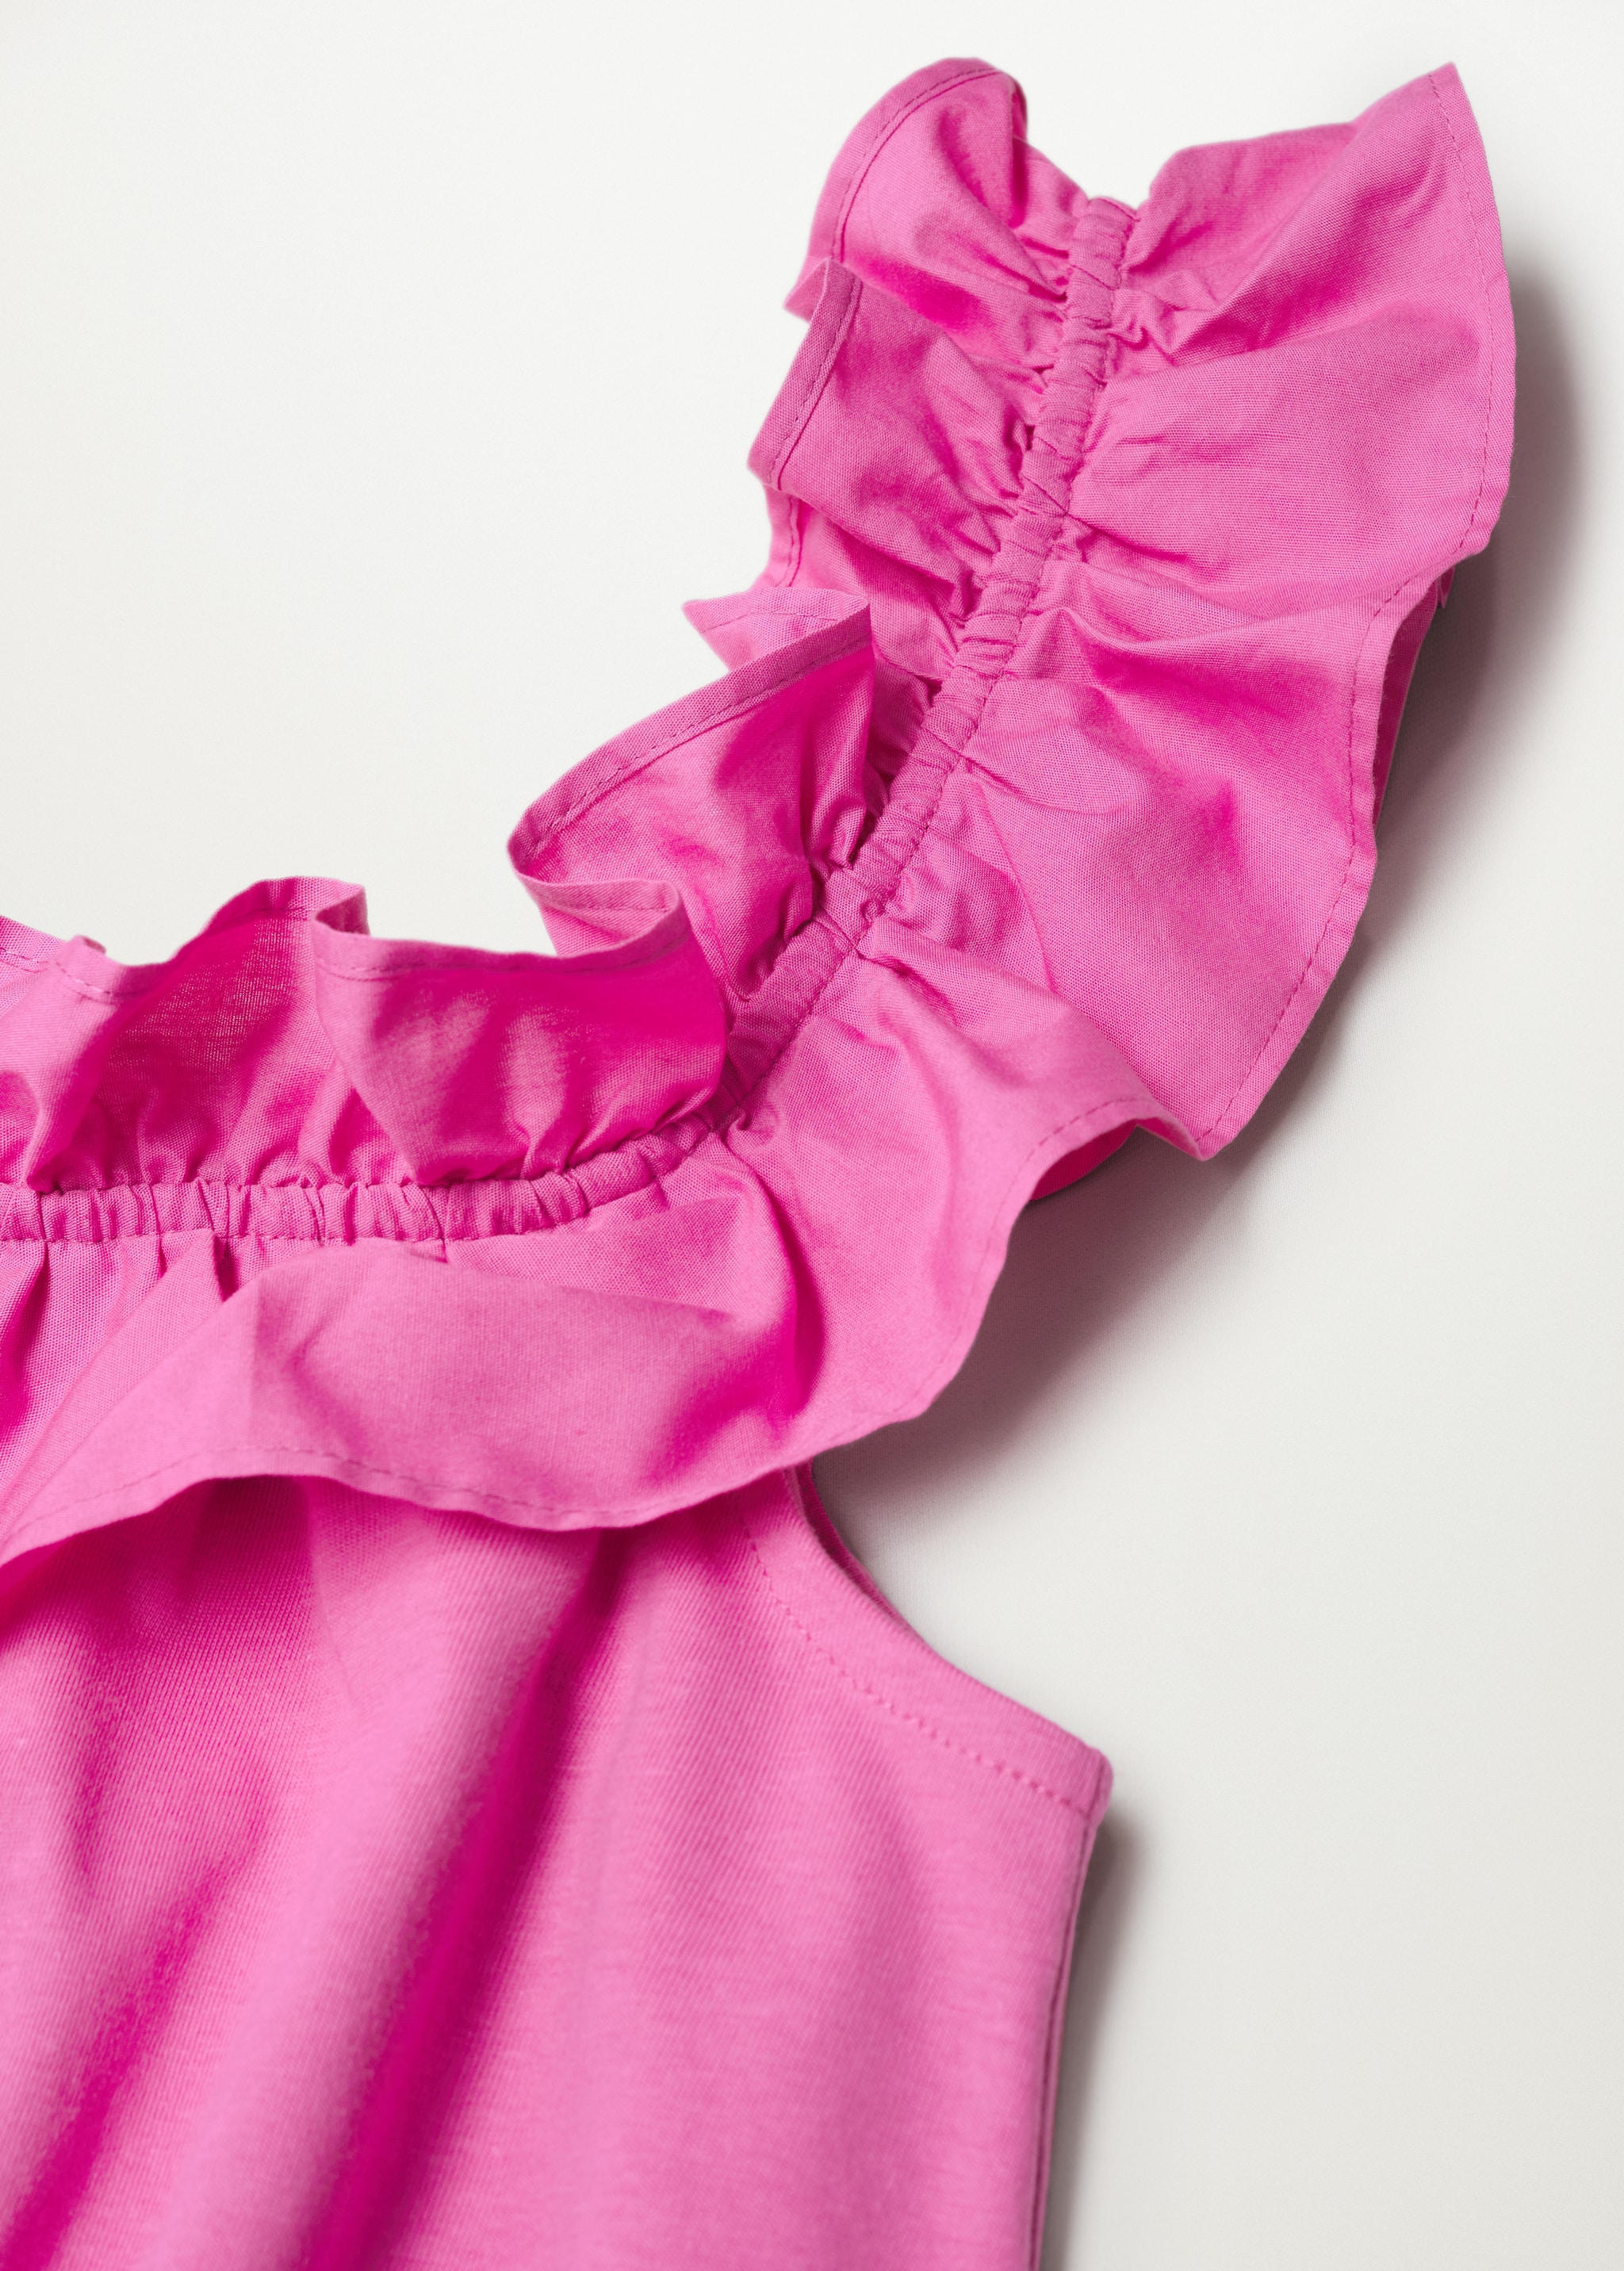 Frill cotton dress - Details of the article 8